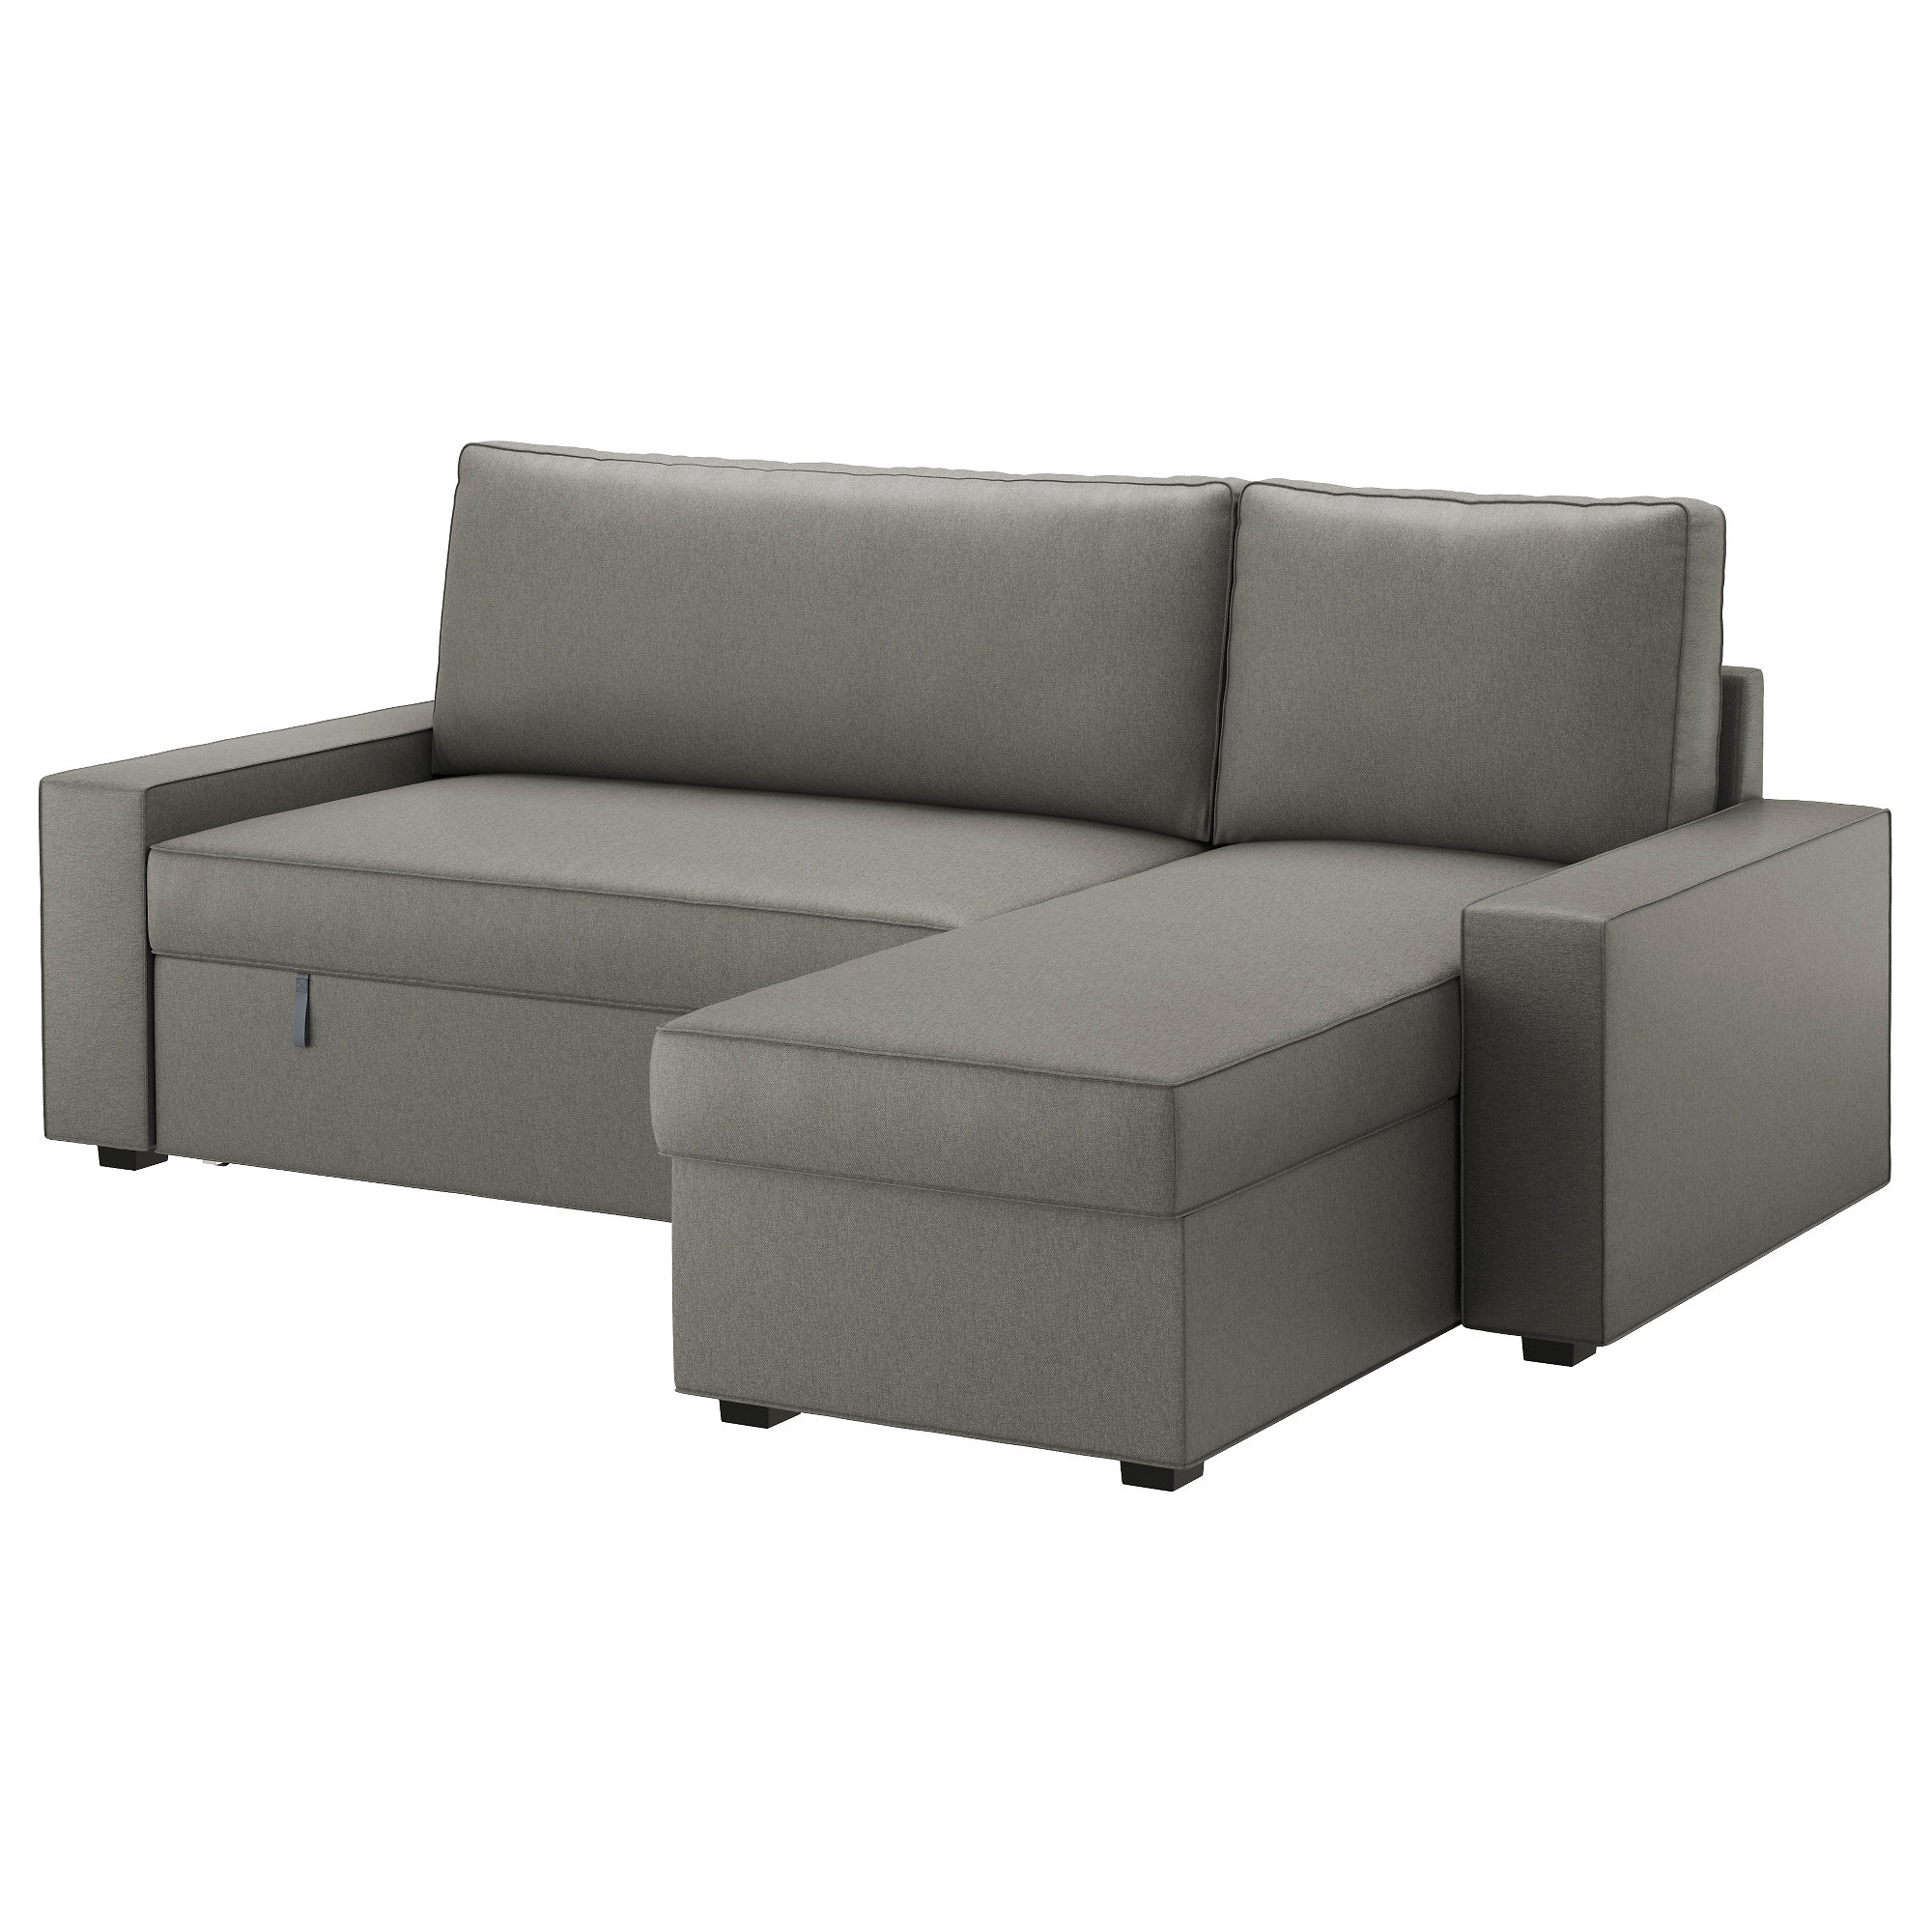 Best ideas about Sofa Chairs Beds
. Save or Pin Corner Sofa Beds Futons & Chair Beds Now.